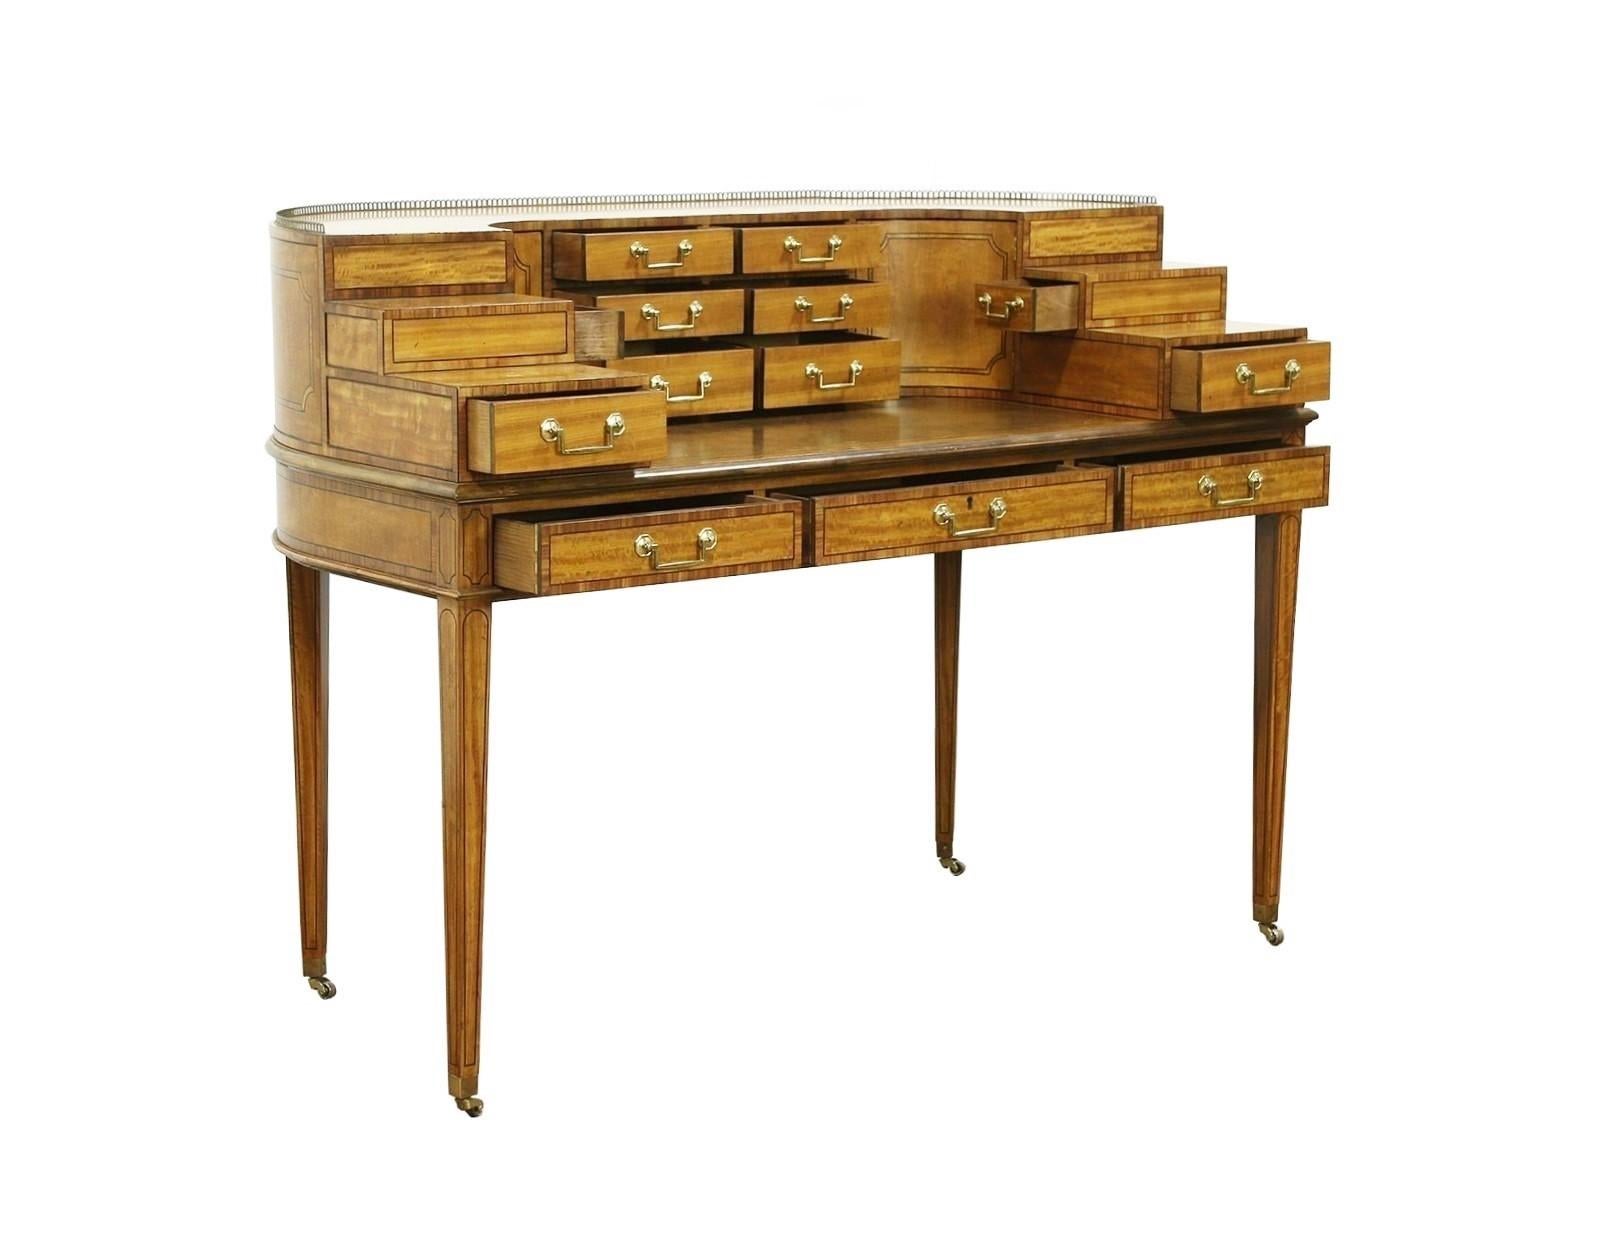 This magnificent 1765 Carlton Desk from the Collector's Edition by Baker Furniture draws inspiration from classic 18th century European designs. Demi-lune form desk crafted in rare East Indian satinwood with a stepped superstructure having an